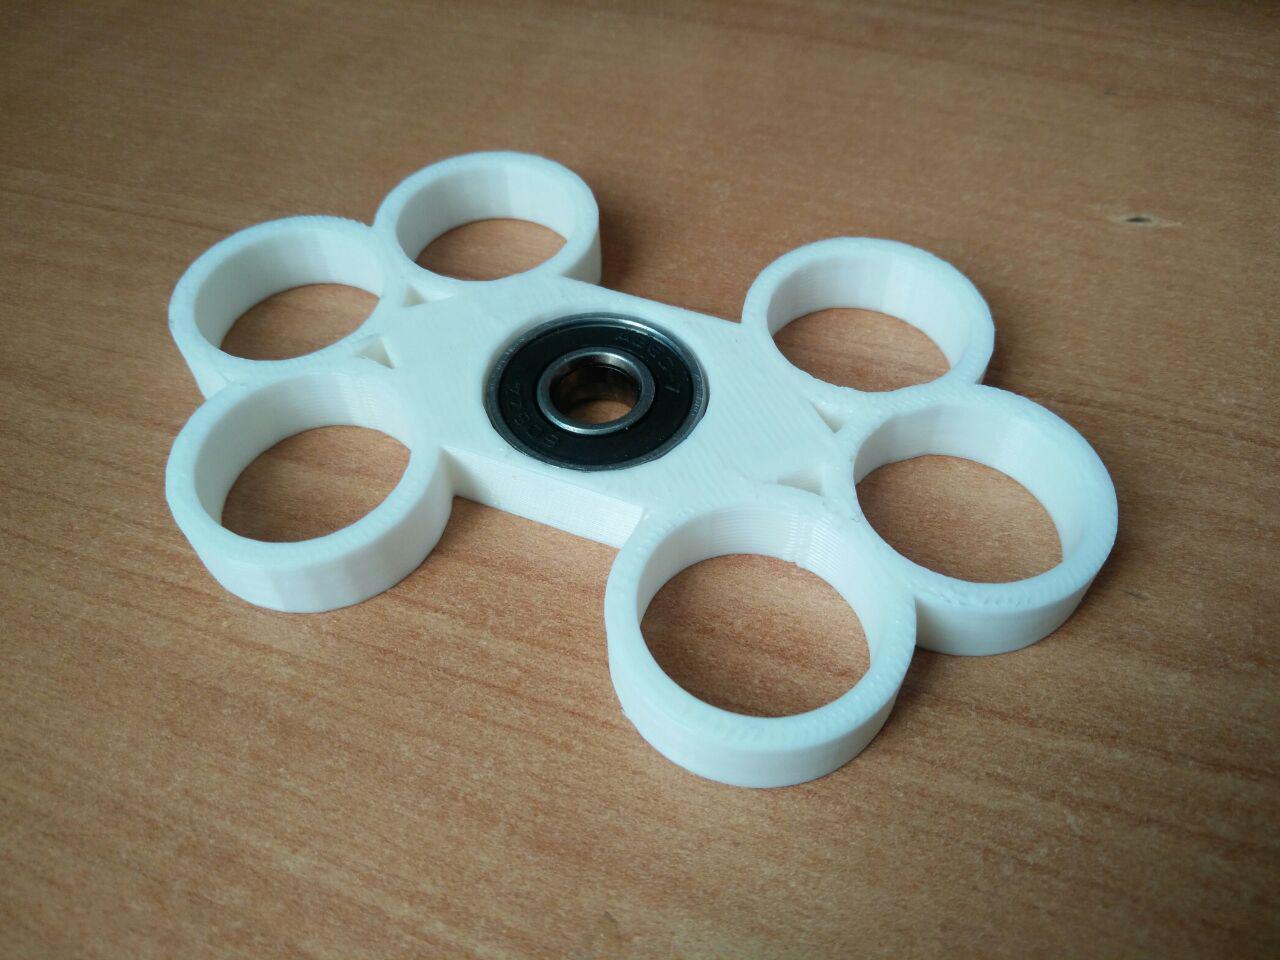 new fidget spinner designed by a 10 yr old